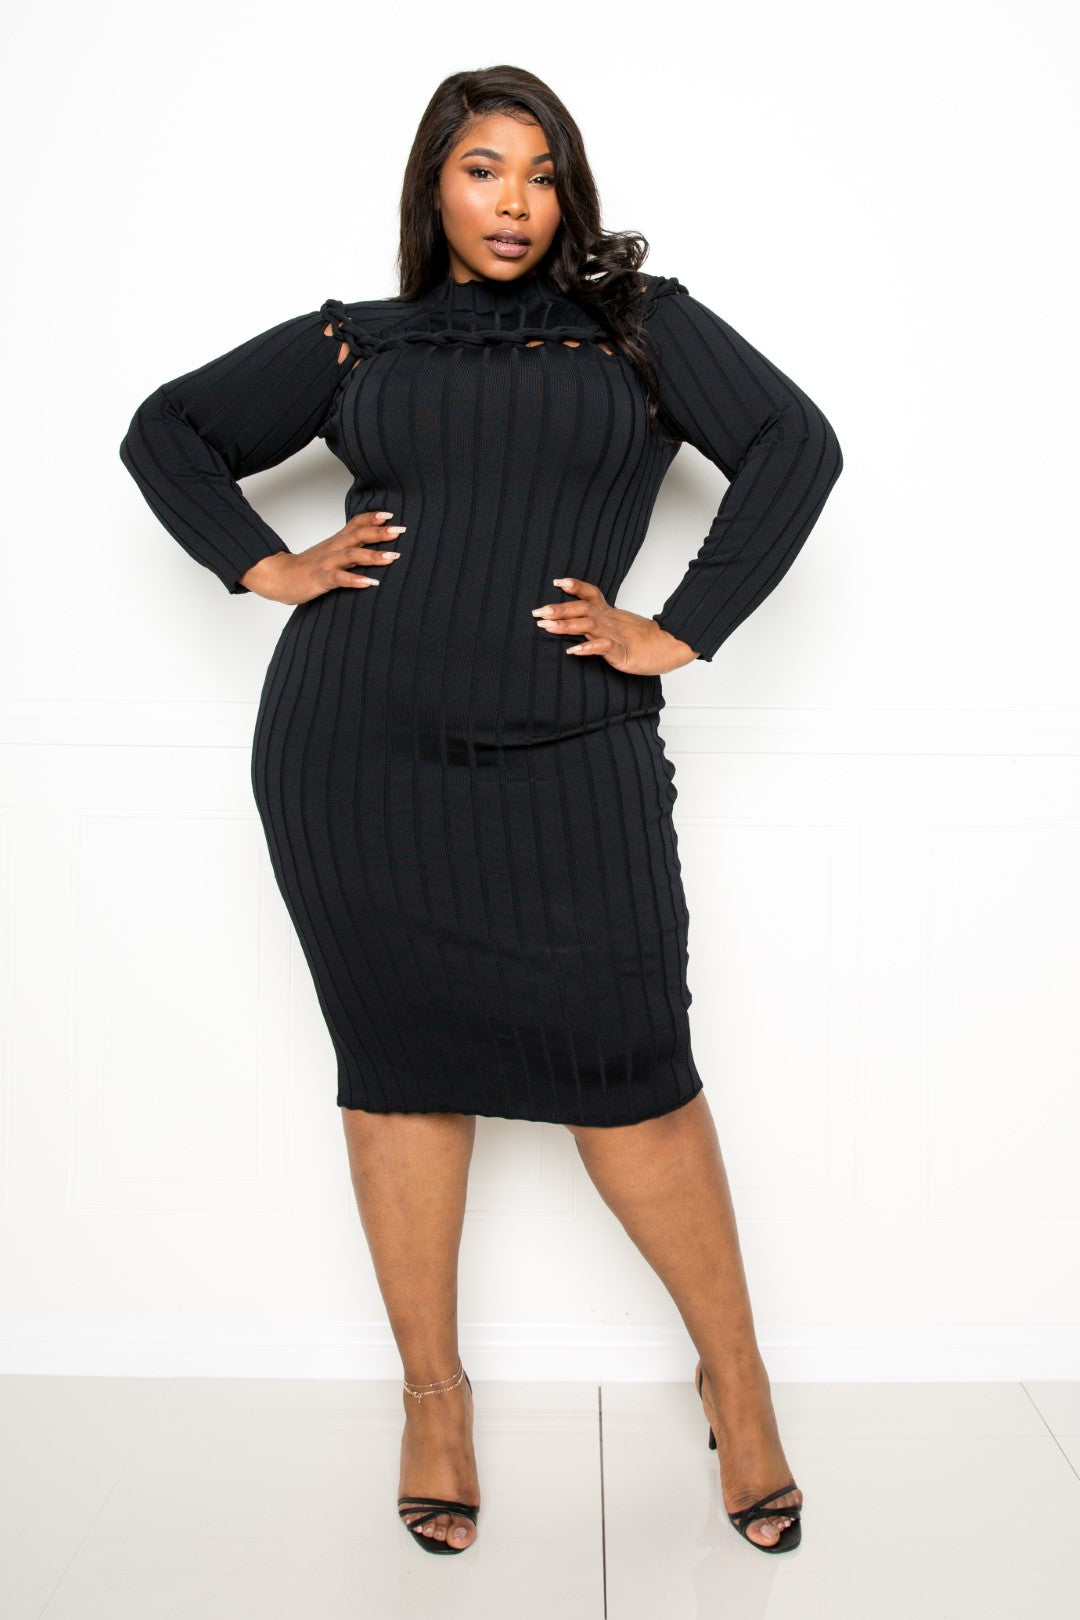 Bodycon Sweater Dress With Knot Detail | Black, Ivory, PLUS SIZE, PLUS SIZE DRESSES, SALE, SALE PLUS SIZE | Style Your Curves